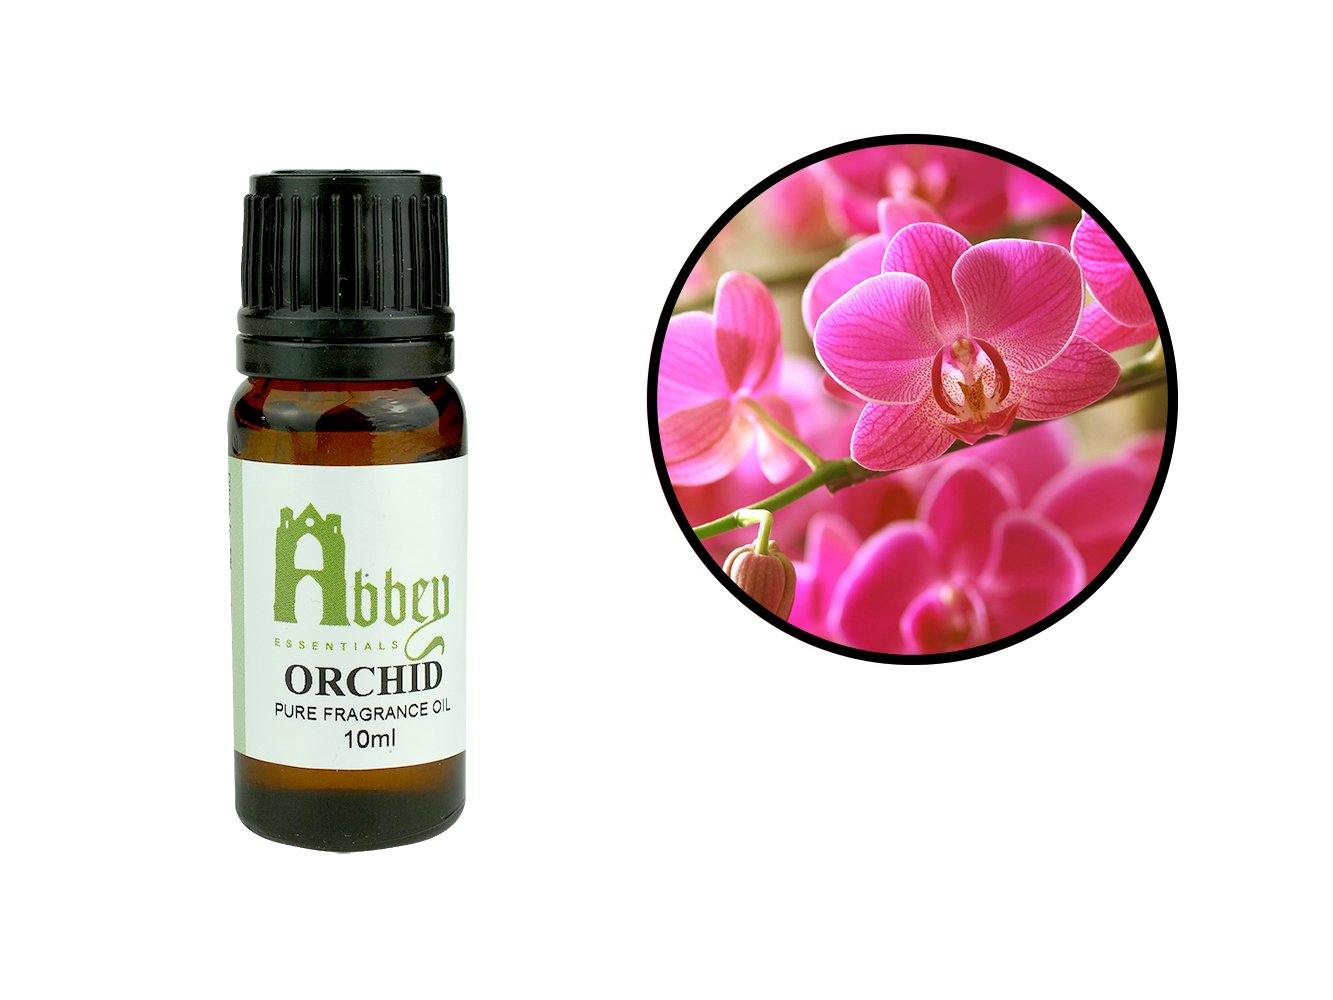 Orchid Fragrance 10ml